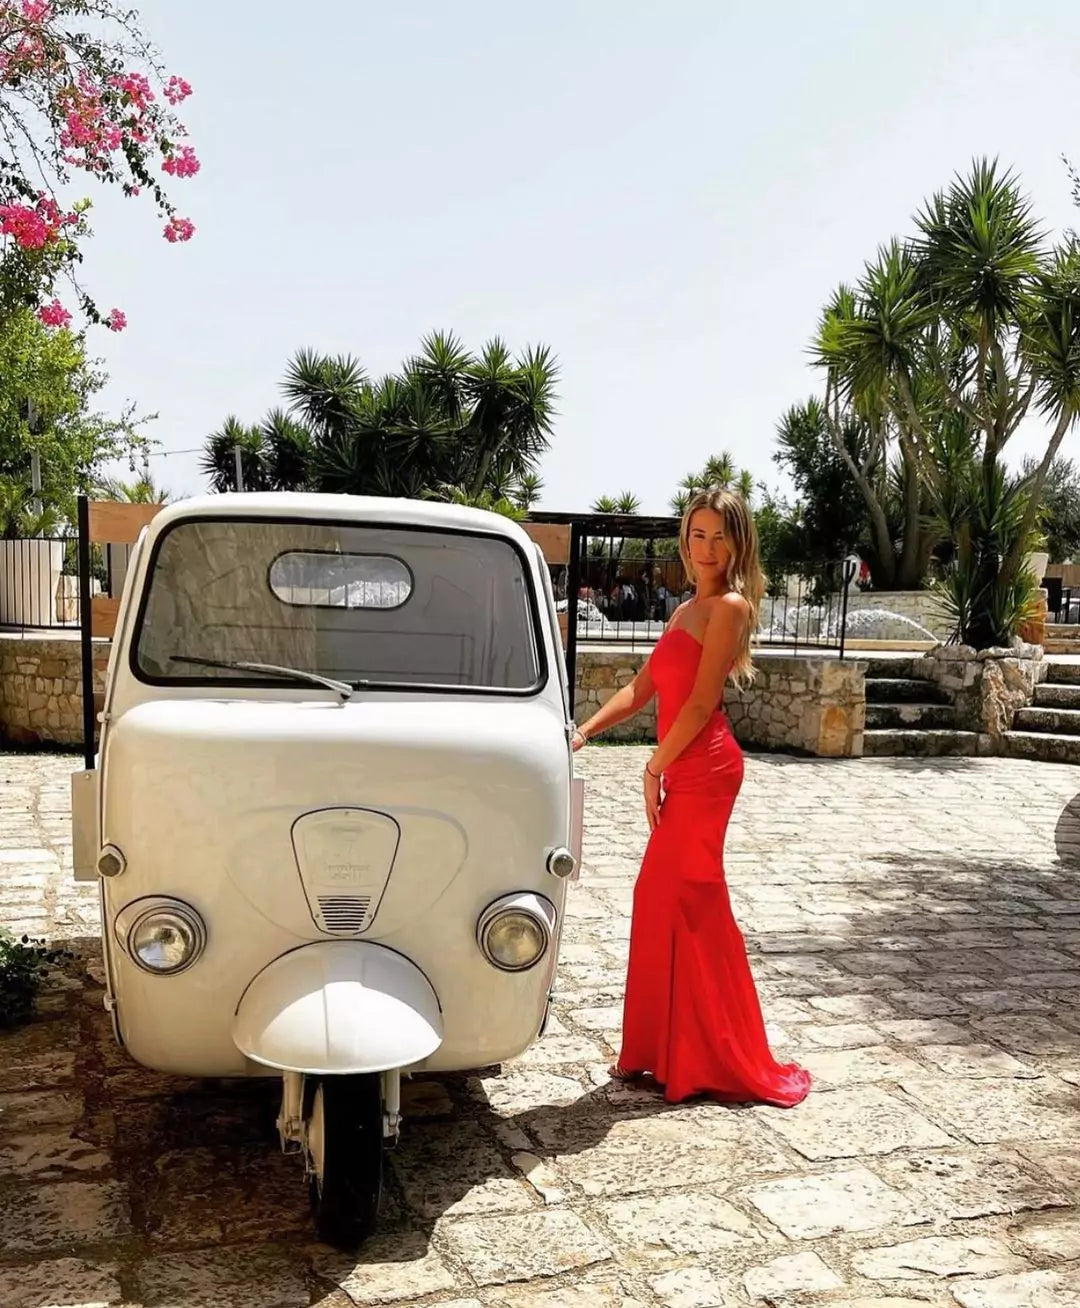 A woman in a red dress standing next to a white car.